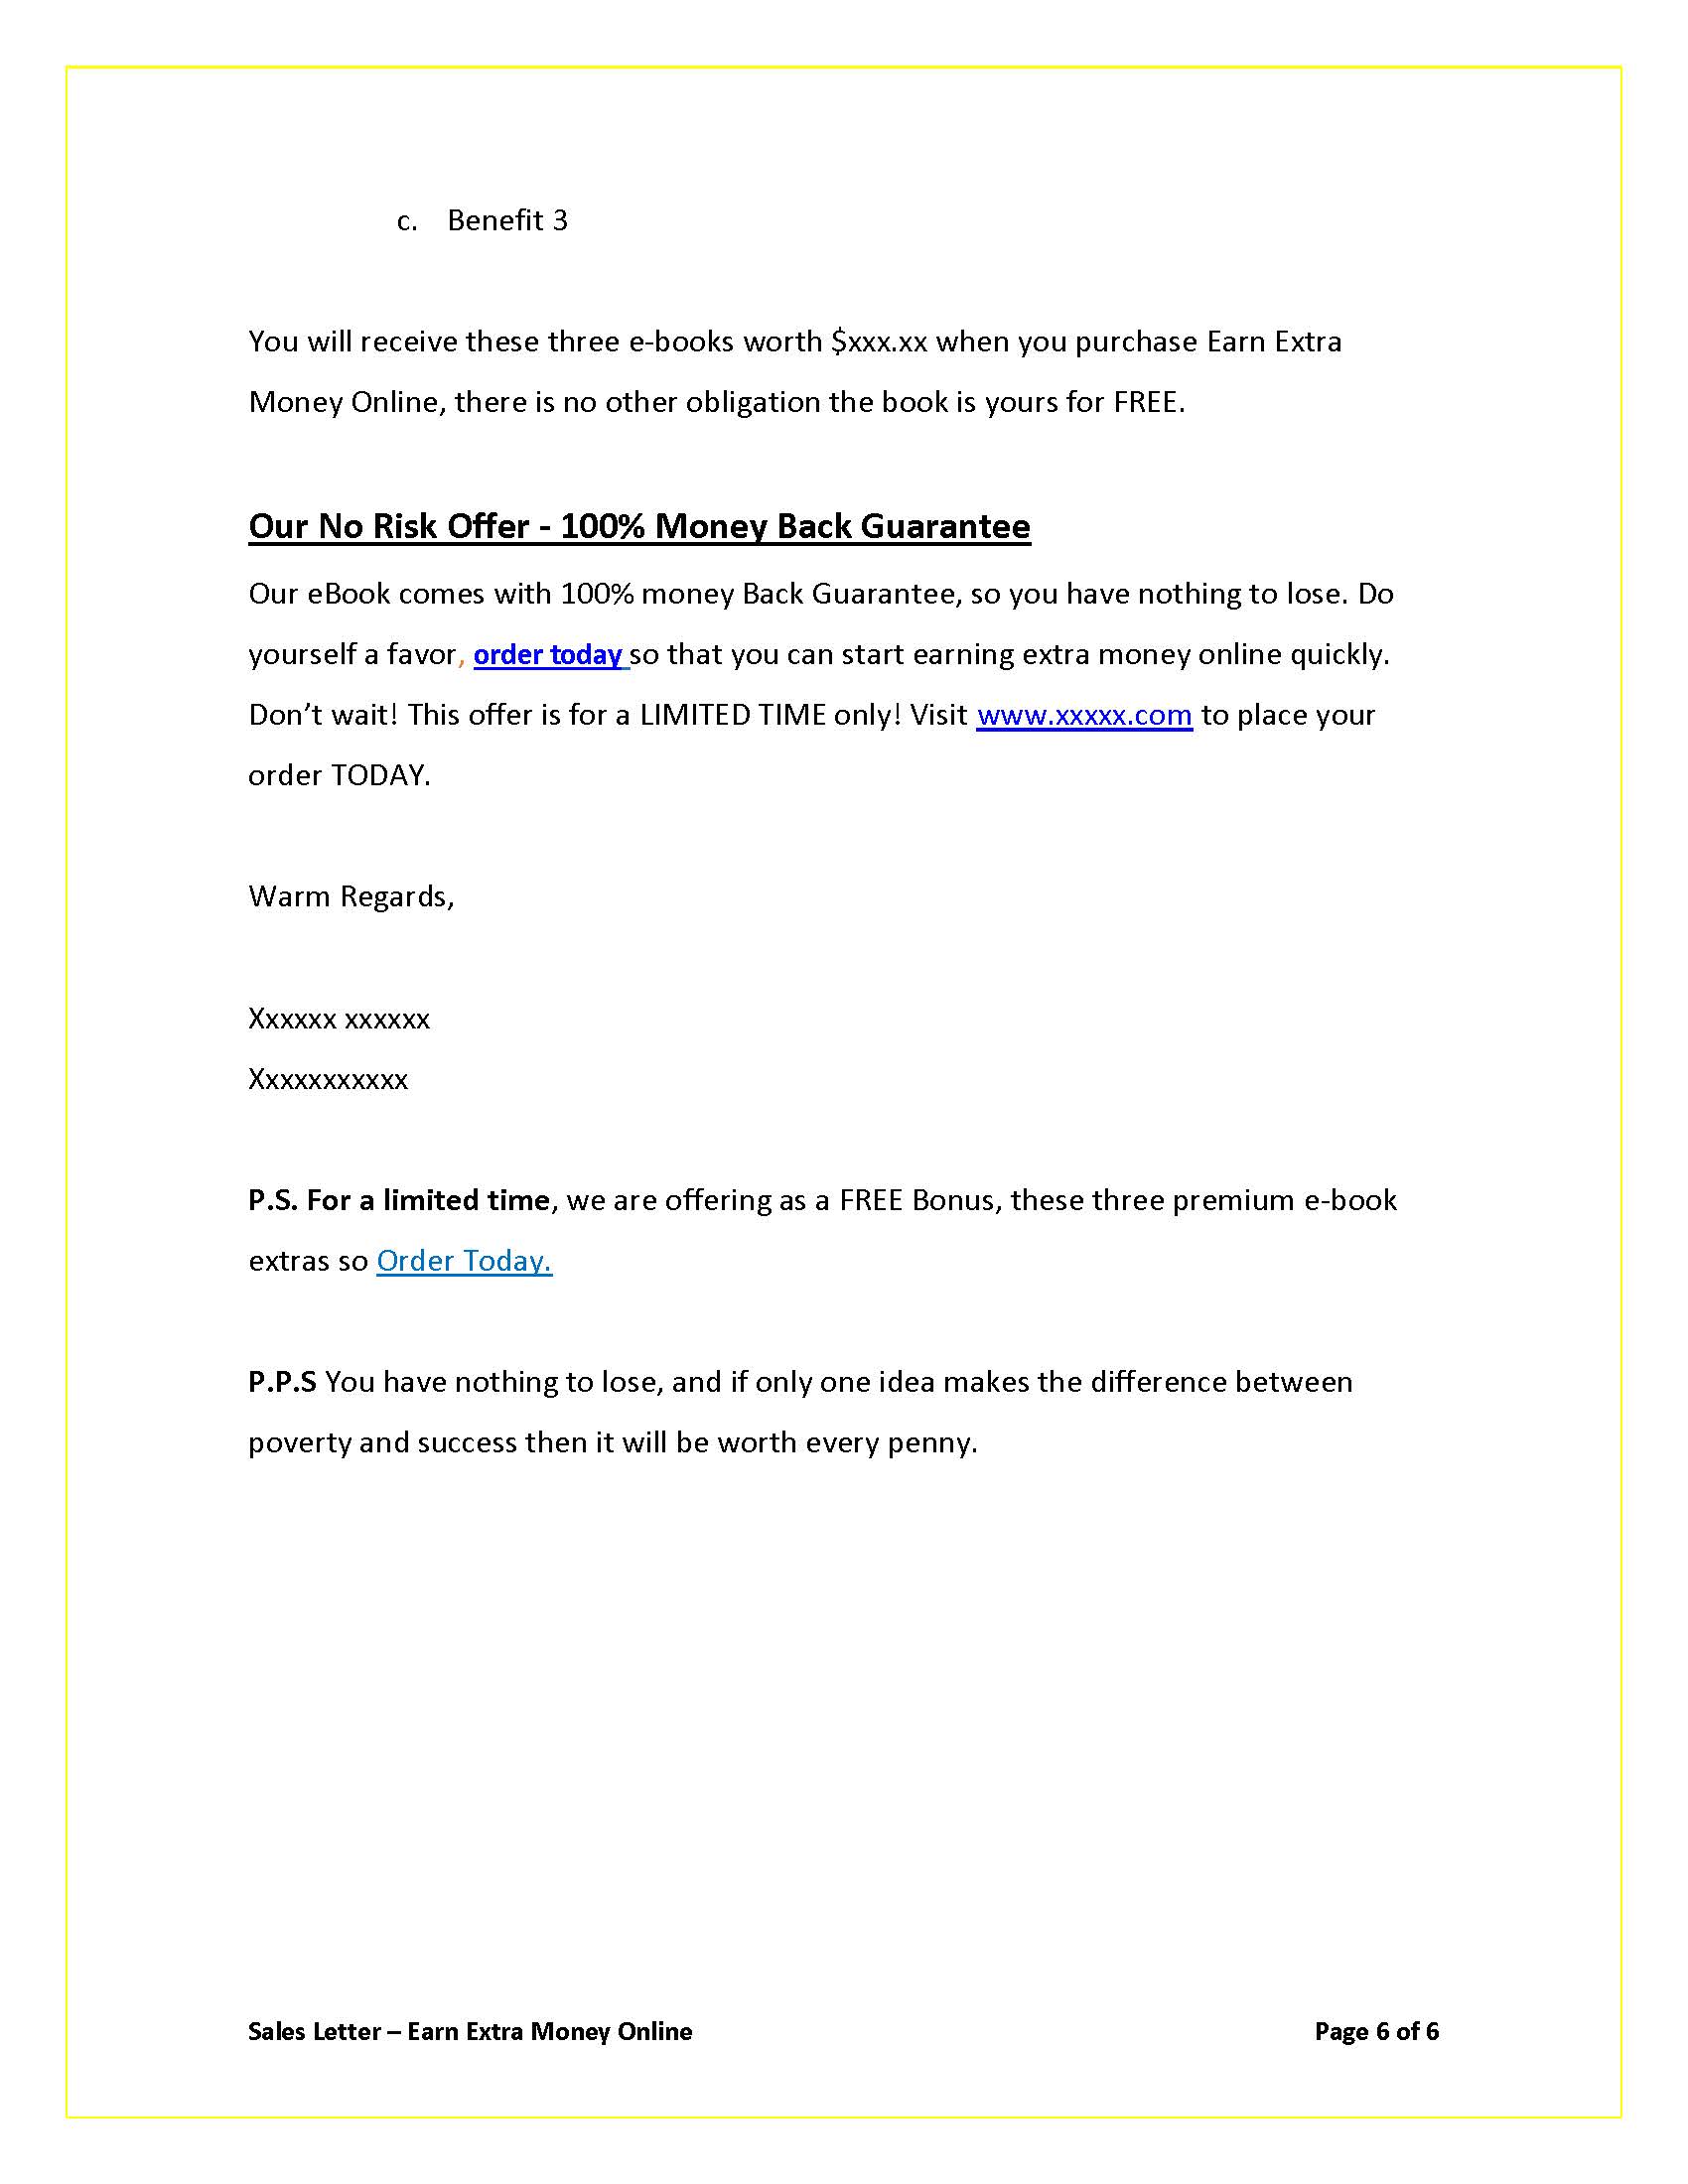 Sales Letter - How To Earn Money Online_Page_6